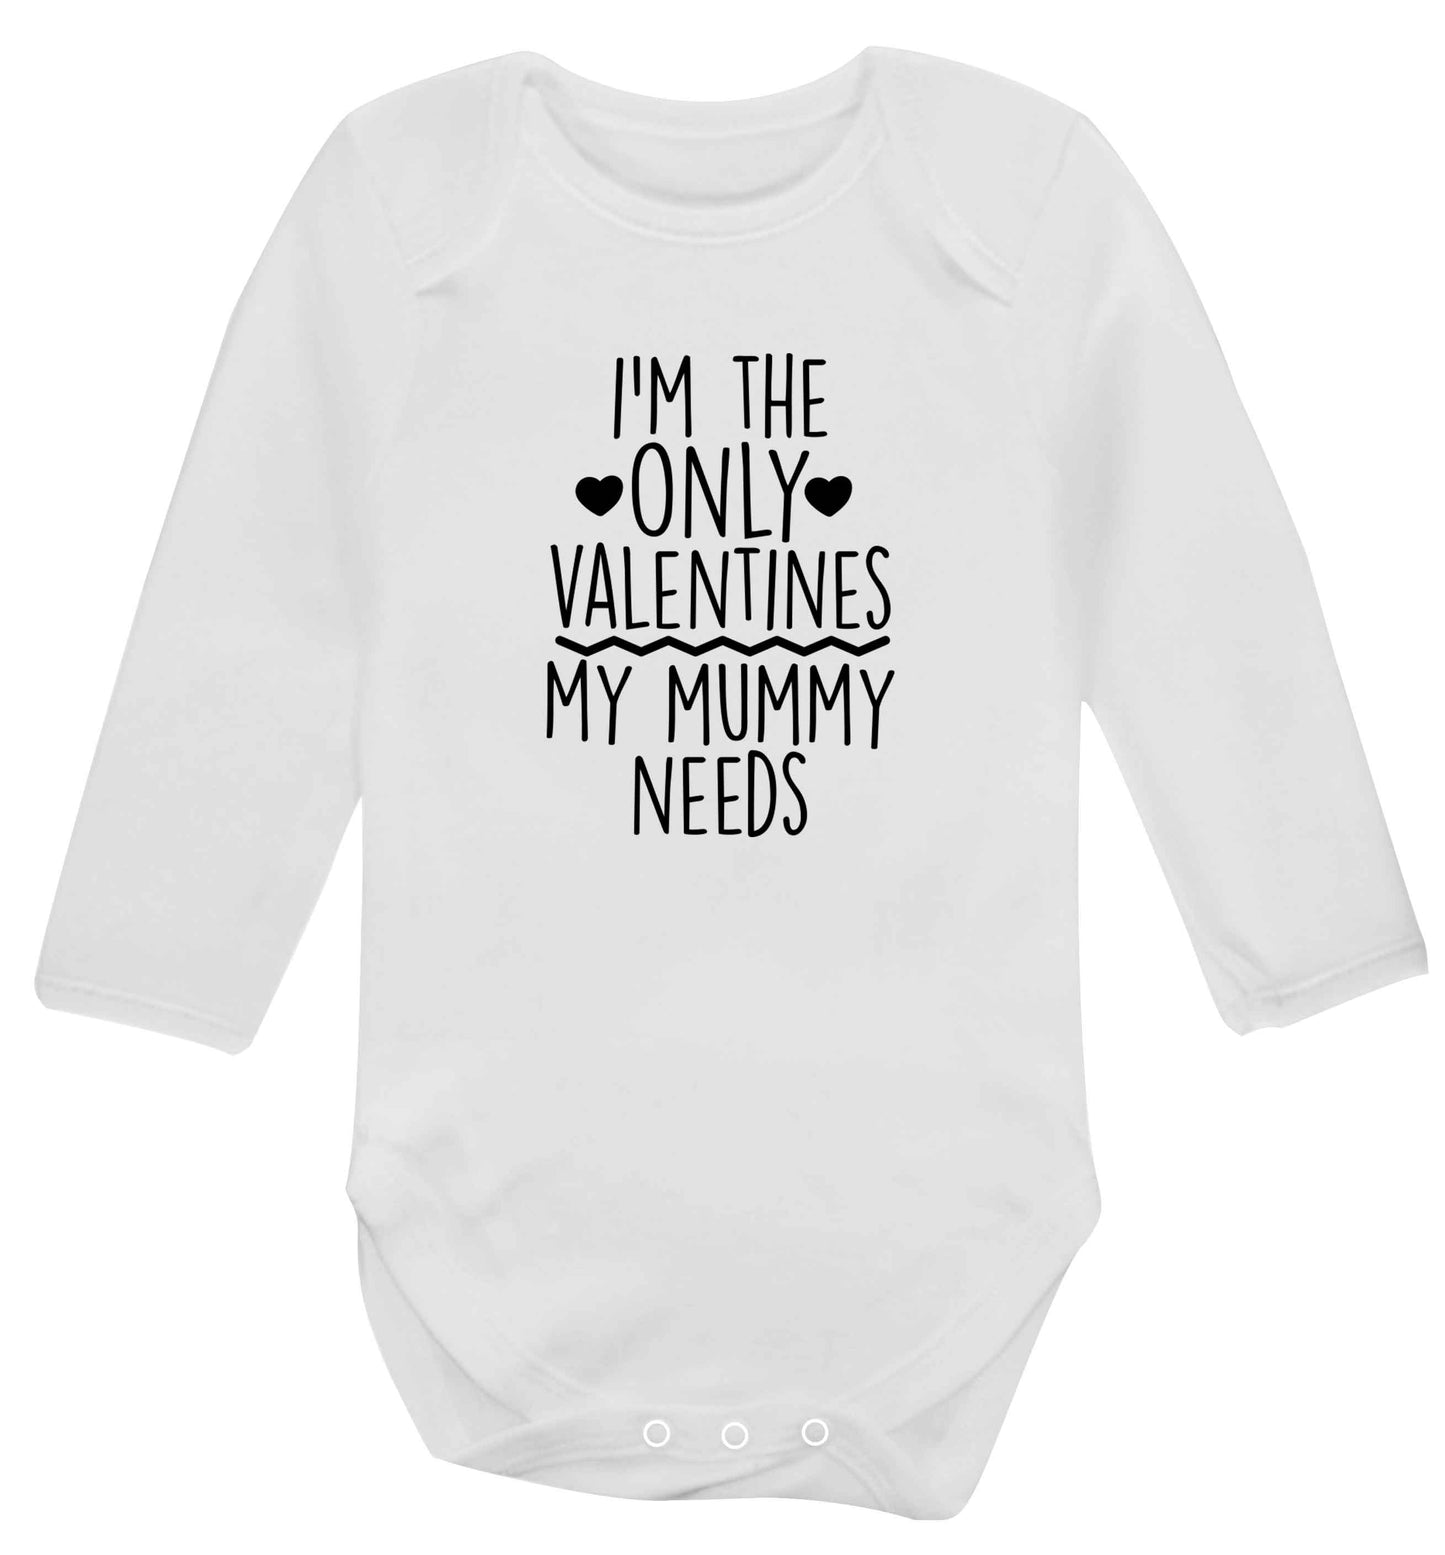 I'm the only valentines my mummy needs baby vest long sleeved white 6-12 months